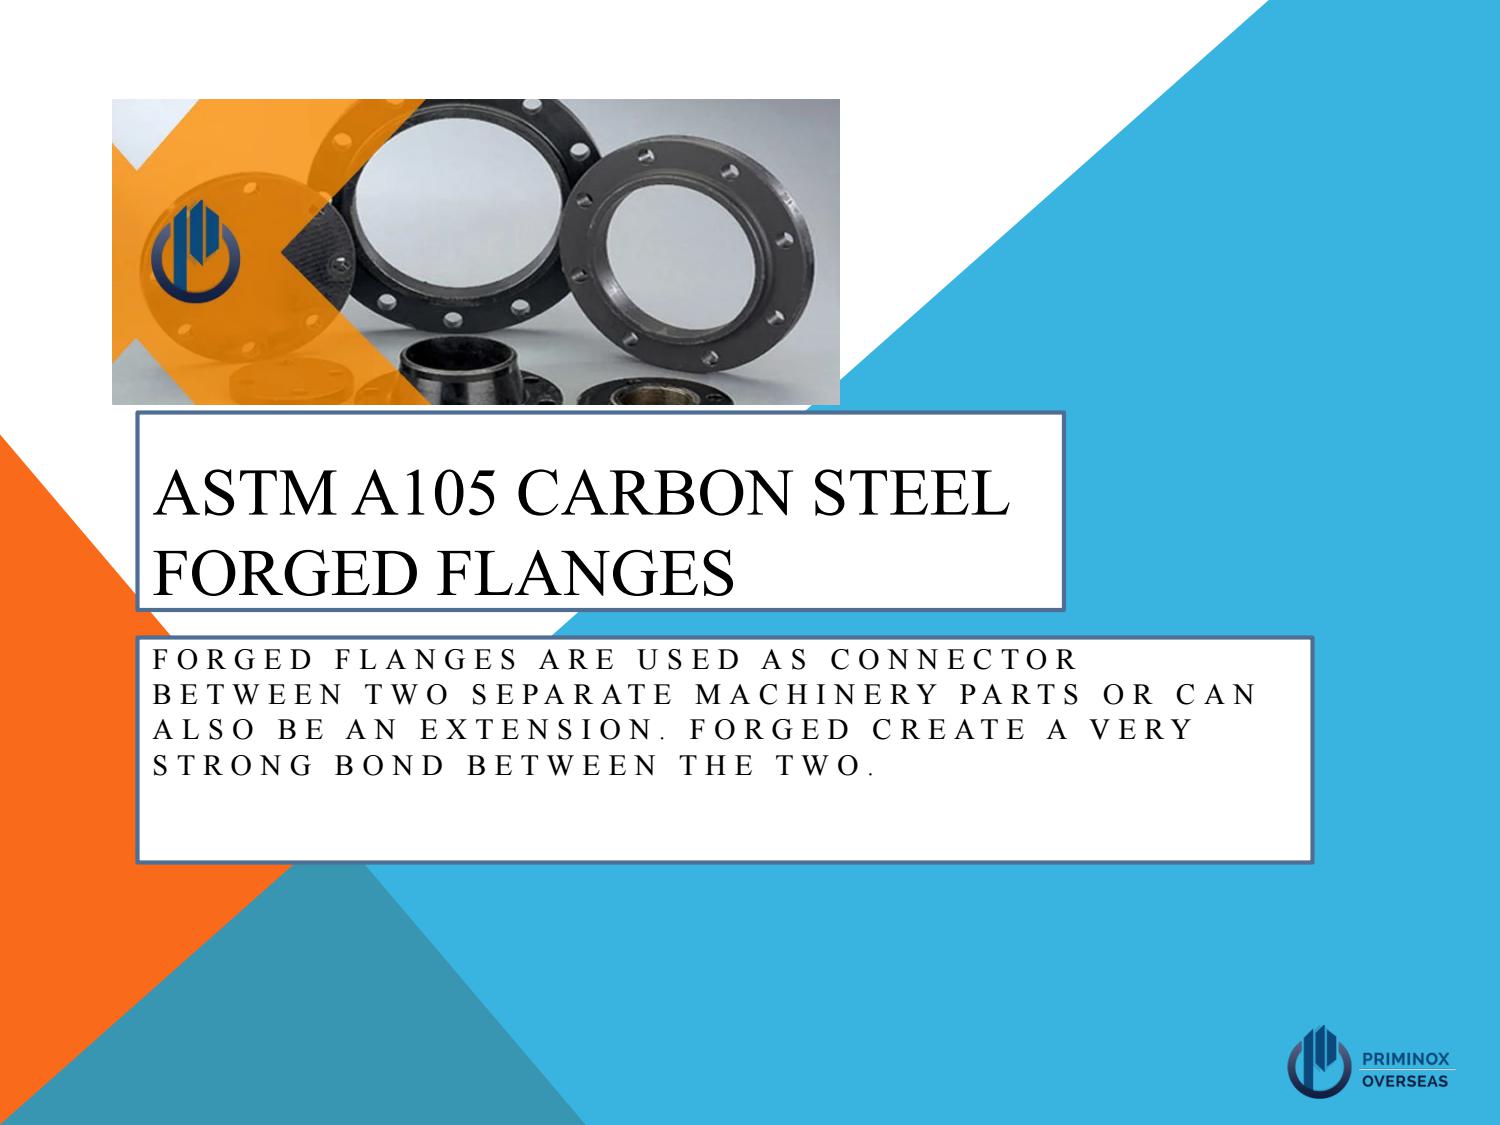 ASTM A105 CARBON STEEL
FORGED FLANGES

FORGED FLANGES ARE USED AS CONNECTOR
BETWEEN TWO SEPARATE MACHINERY PARTS OR CAN
ALSO BE AN EXTENSION. FORGED CREATE A VERY
STRONG BOND BETWEEN THE TWO.